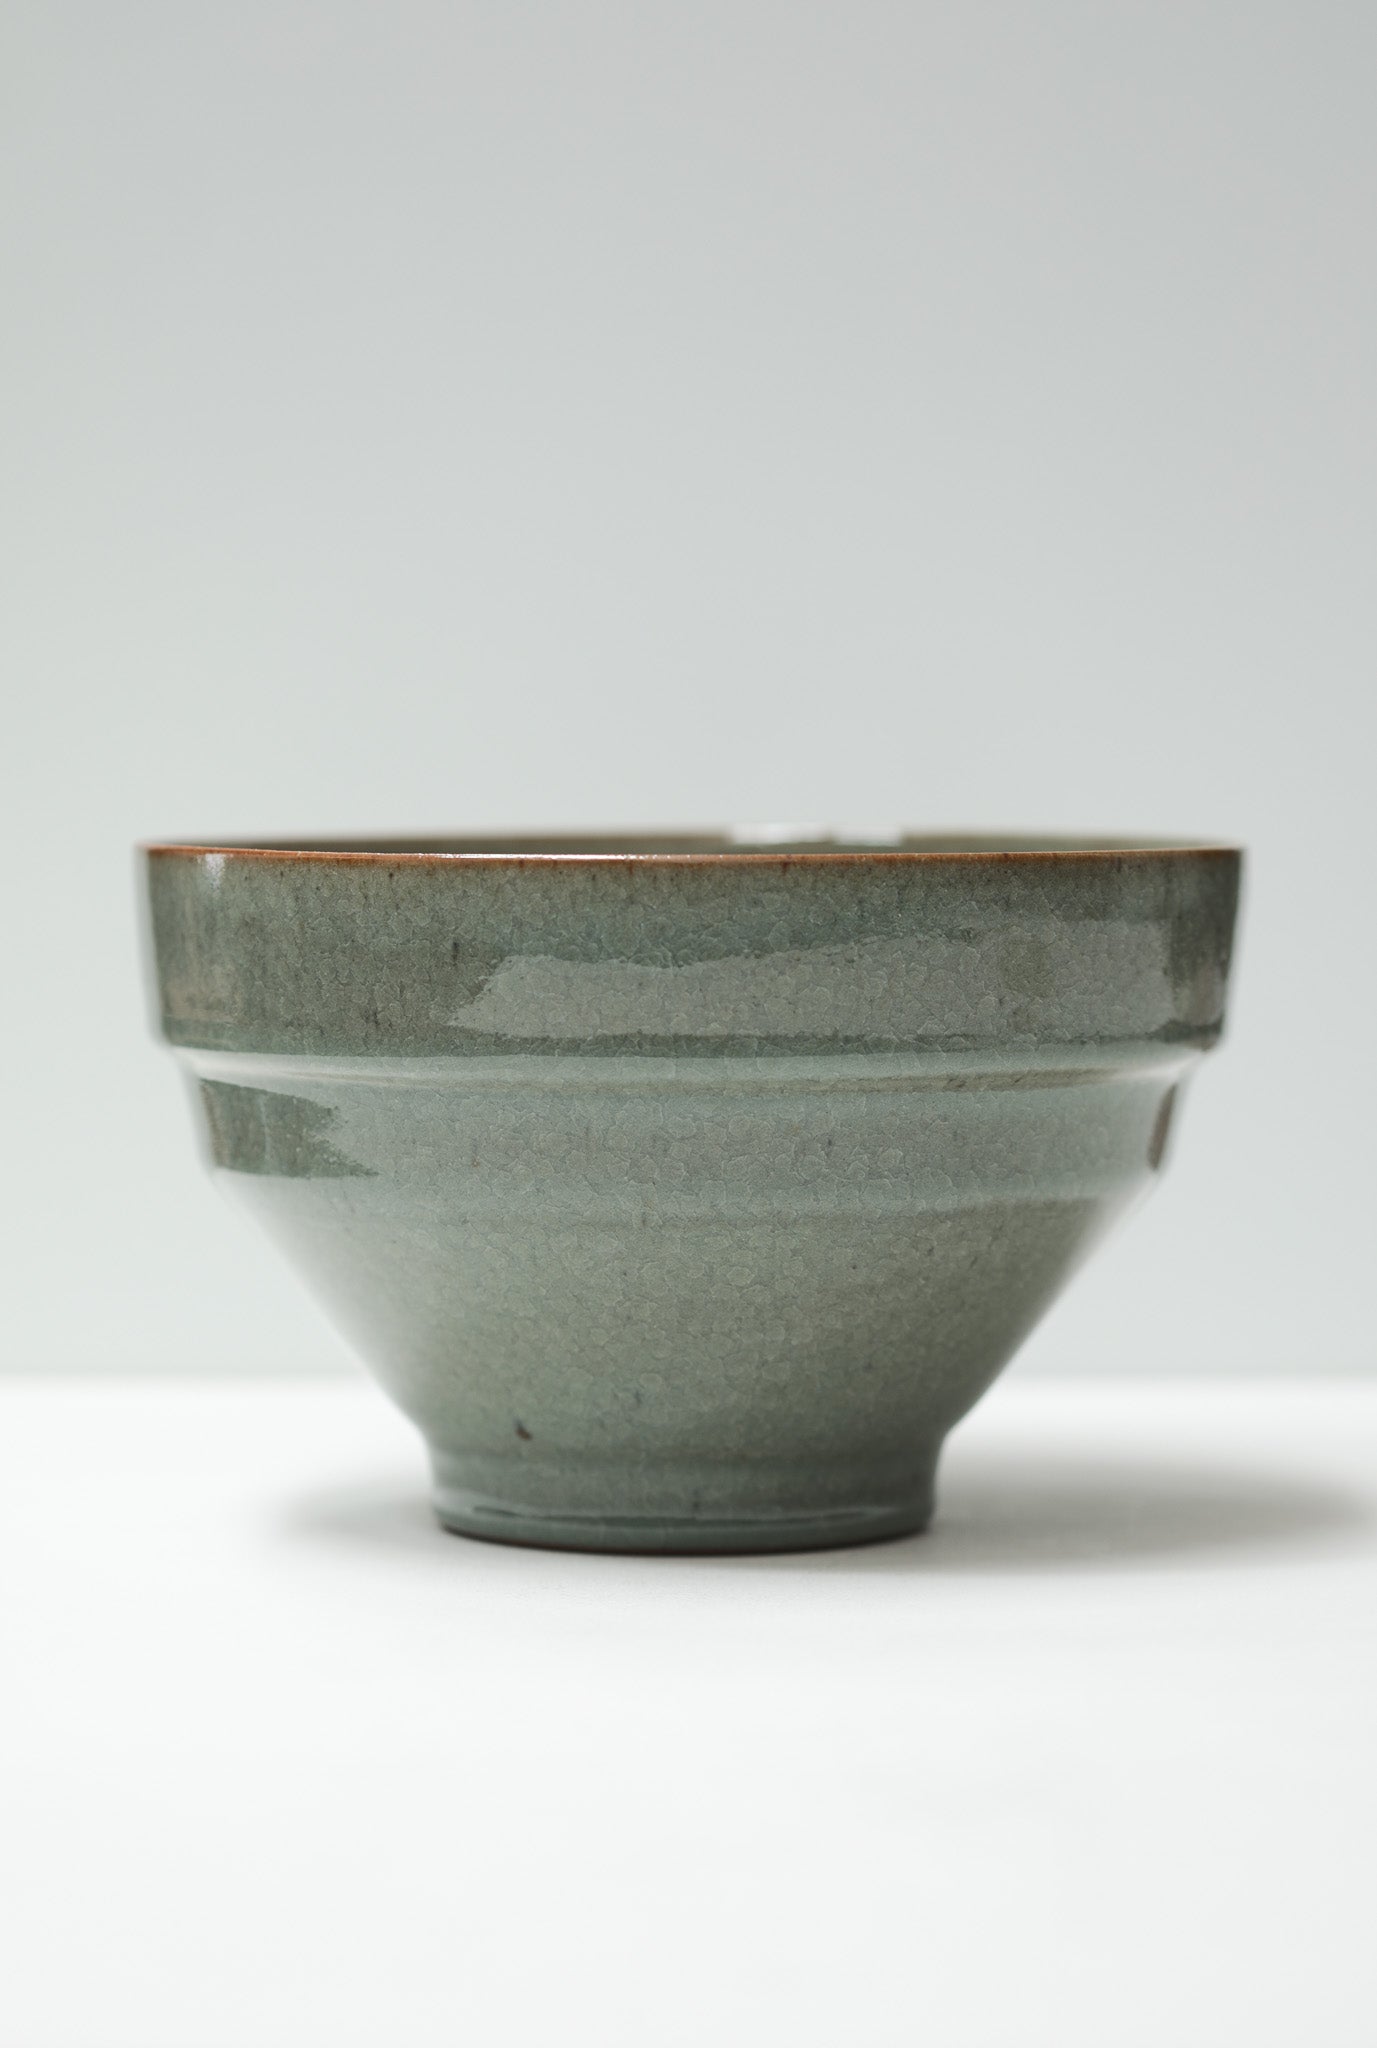 Florian Gadsby: Large Stepped Bowl